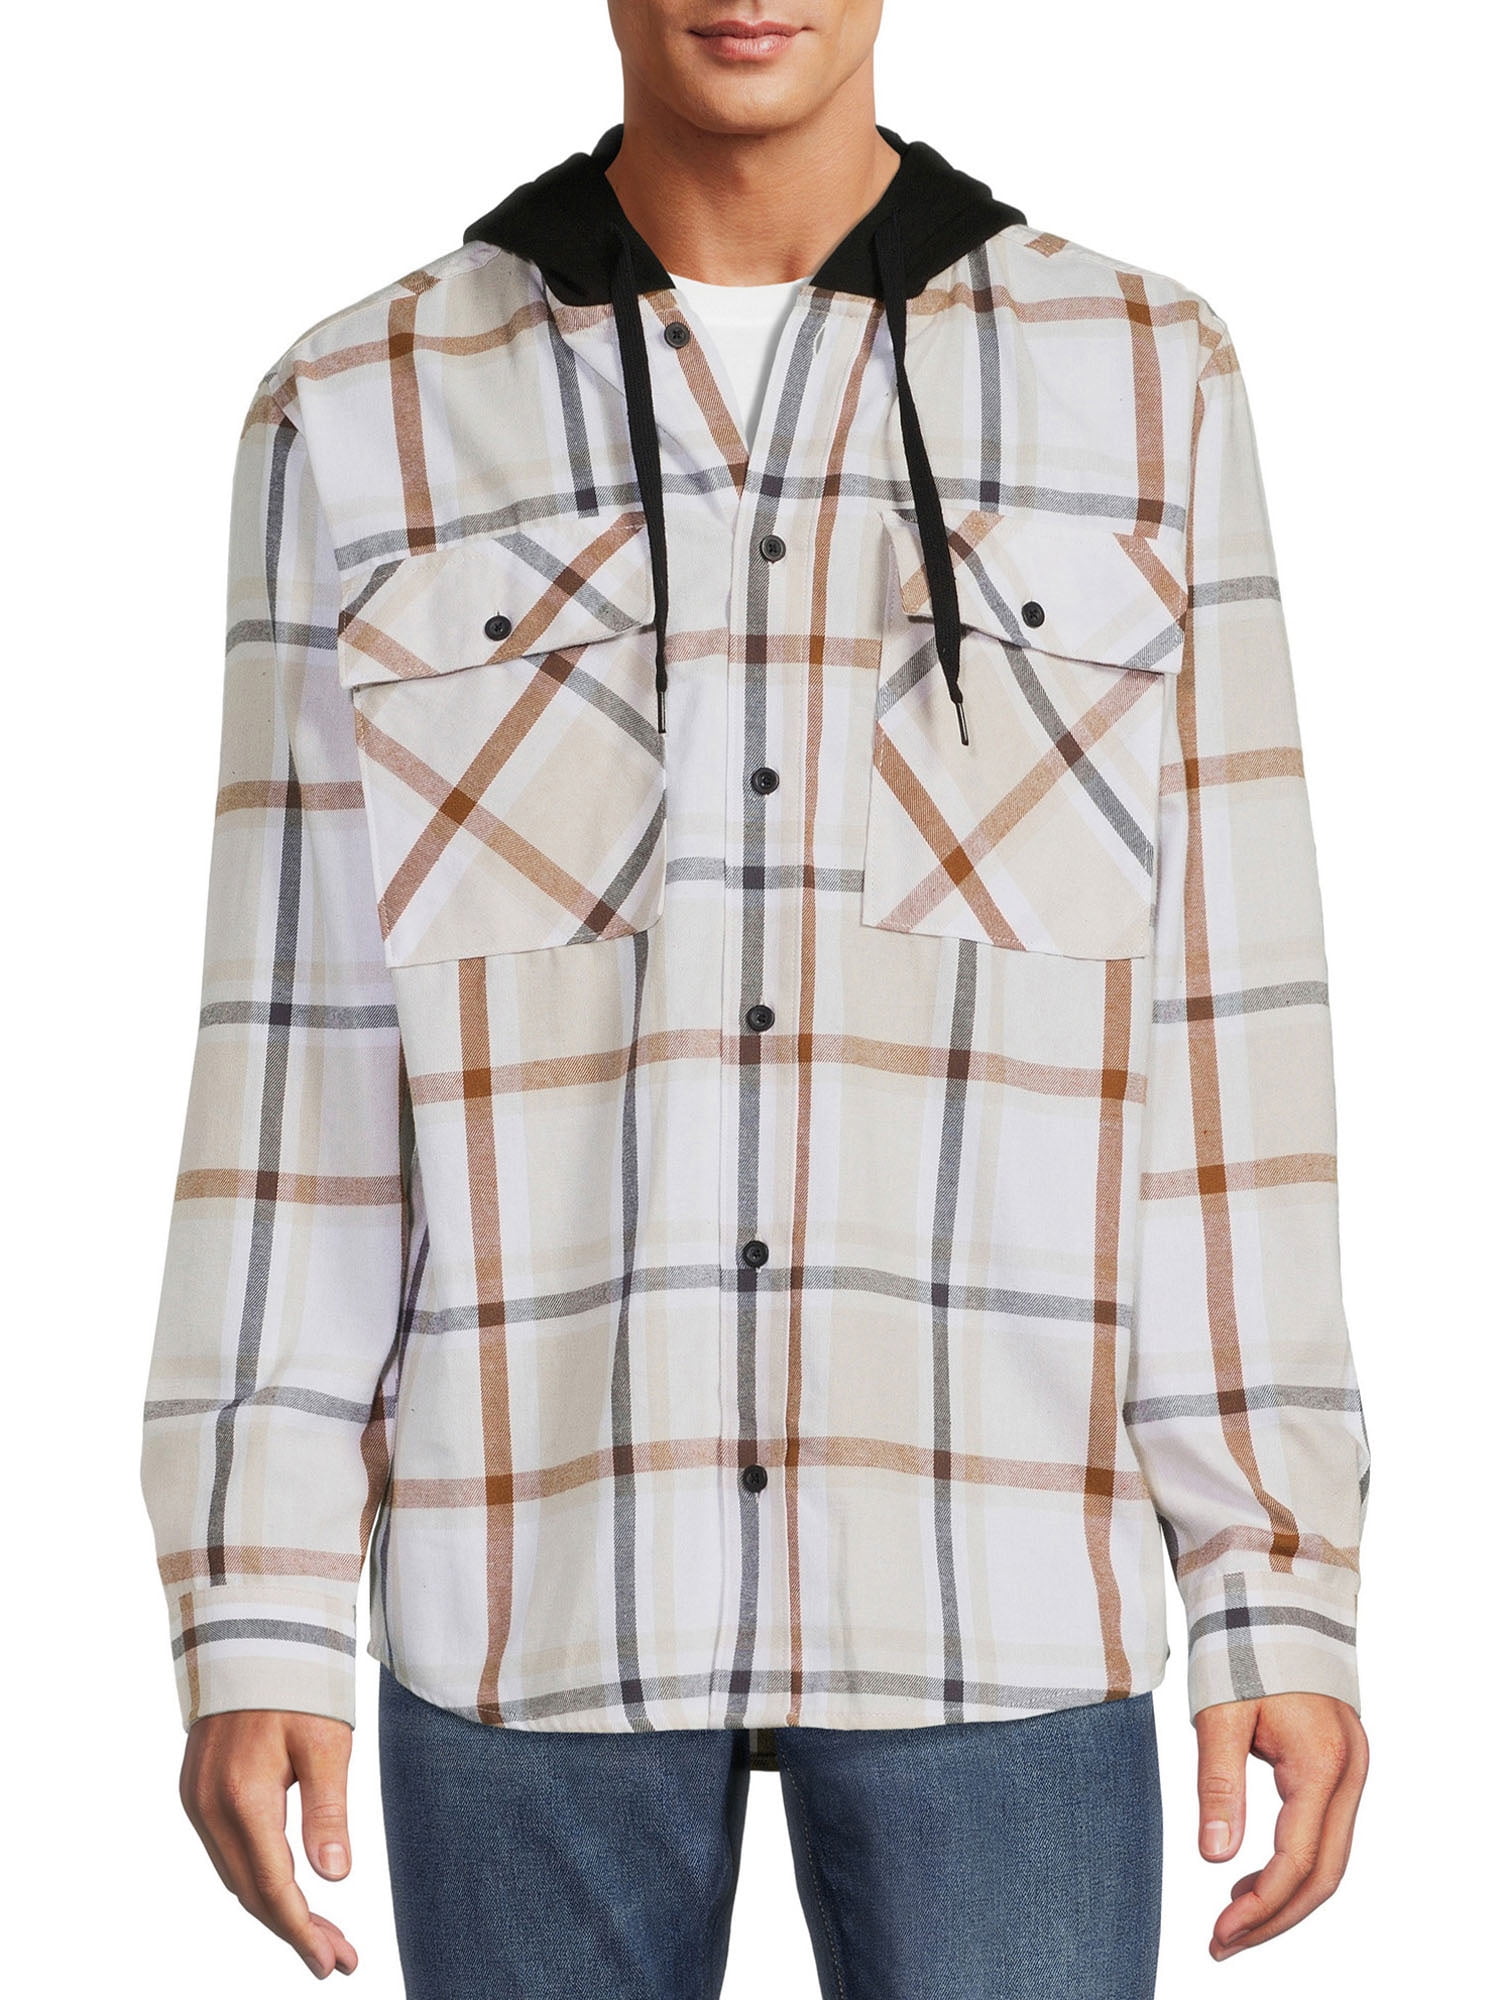 No Boundaries Men's and Big Men's Long Sleeve Hooded Flannel Shirt, Sizes up to 5X